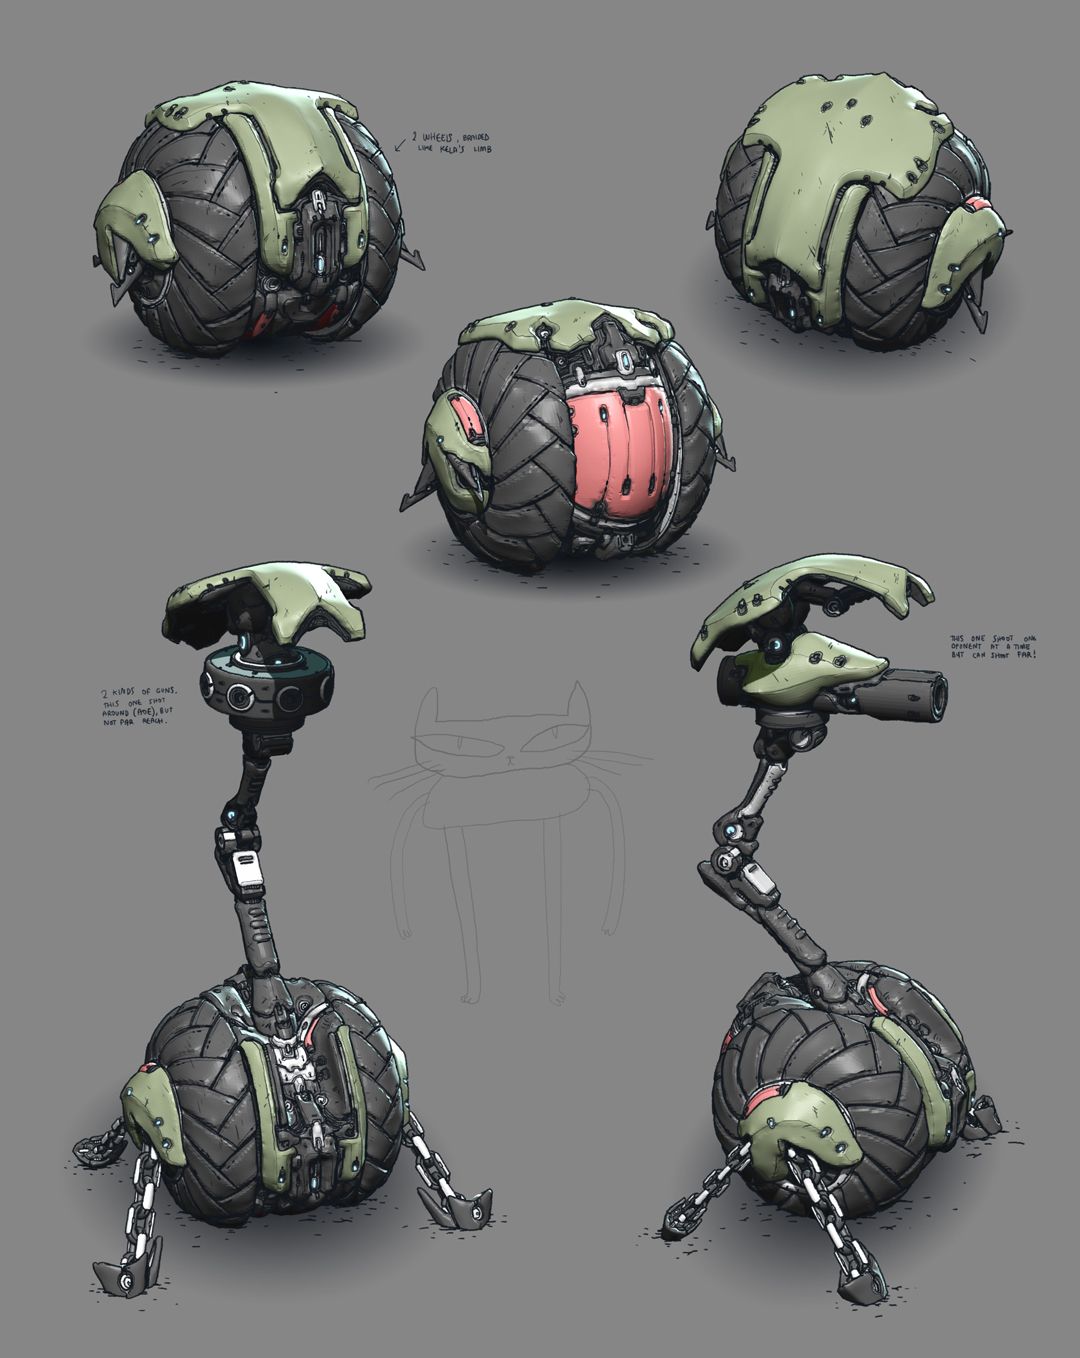 Warframe concept Tap the link for an awesome selection of drones and accessories...